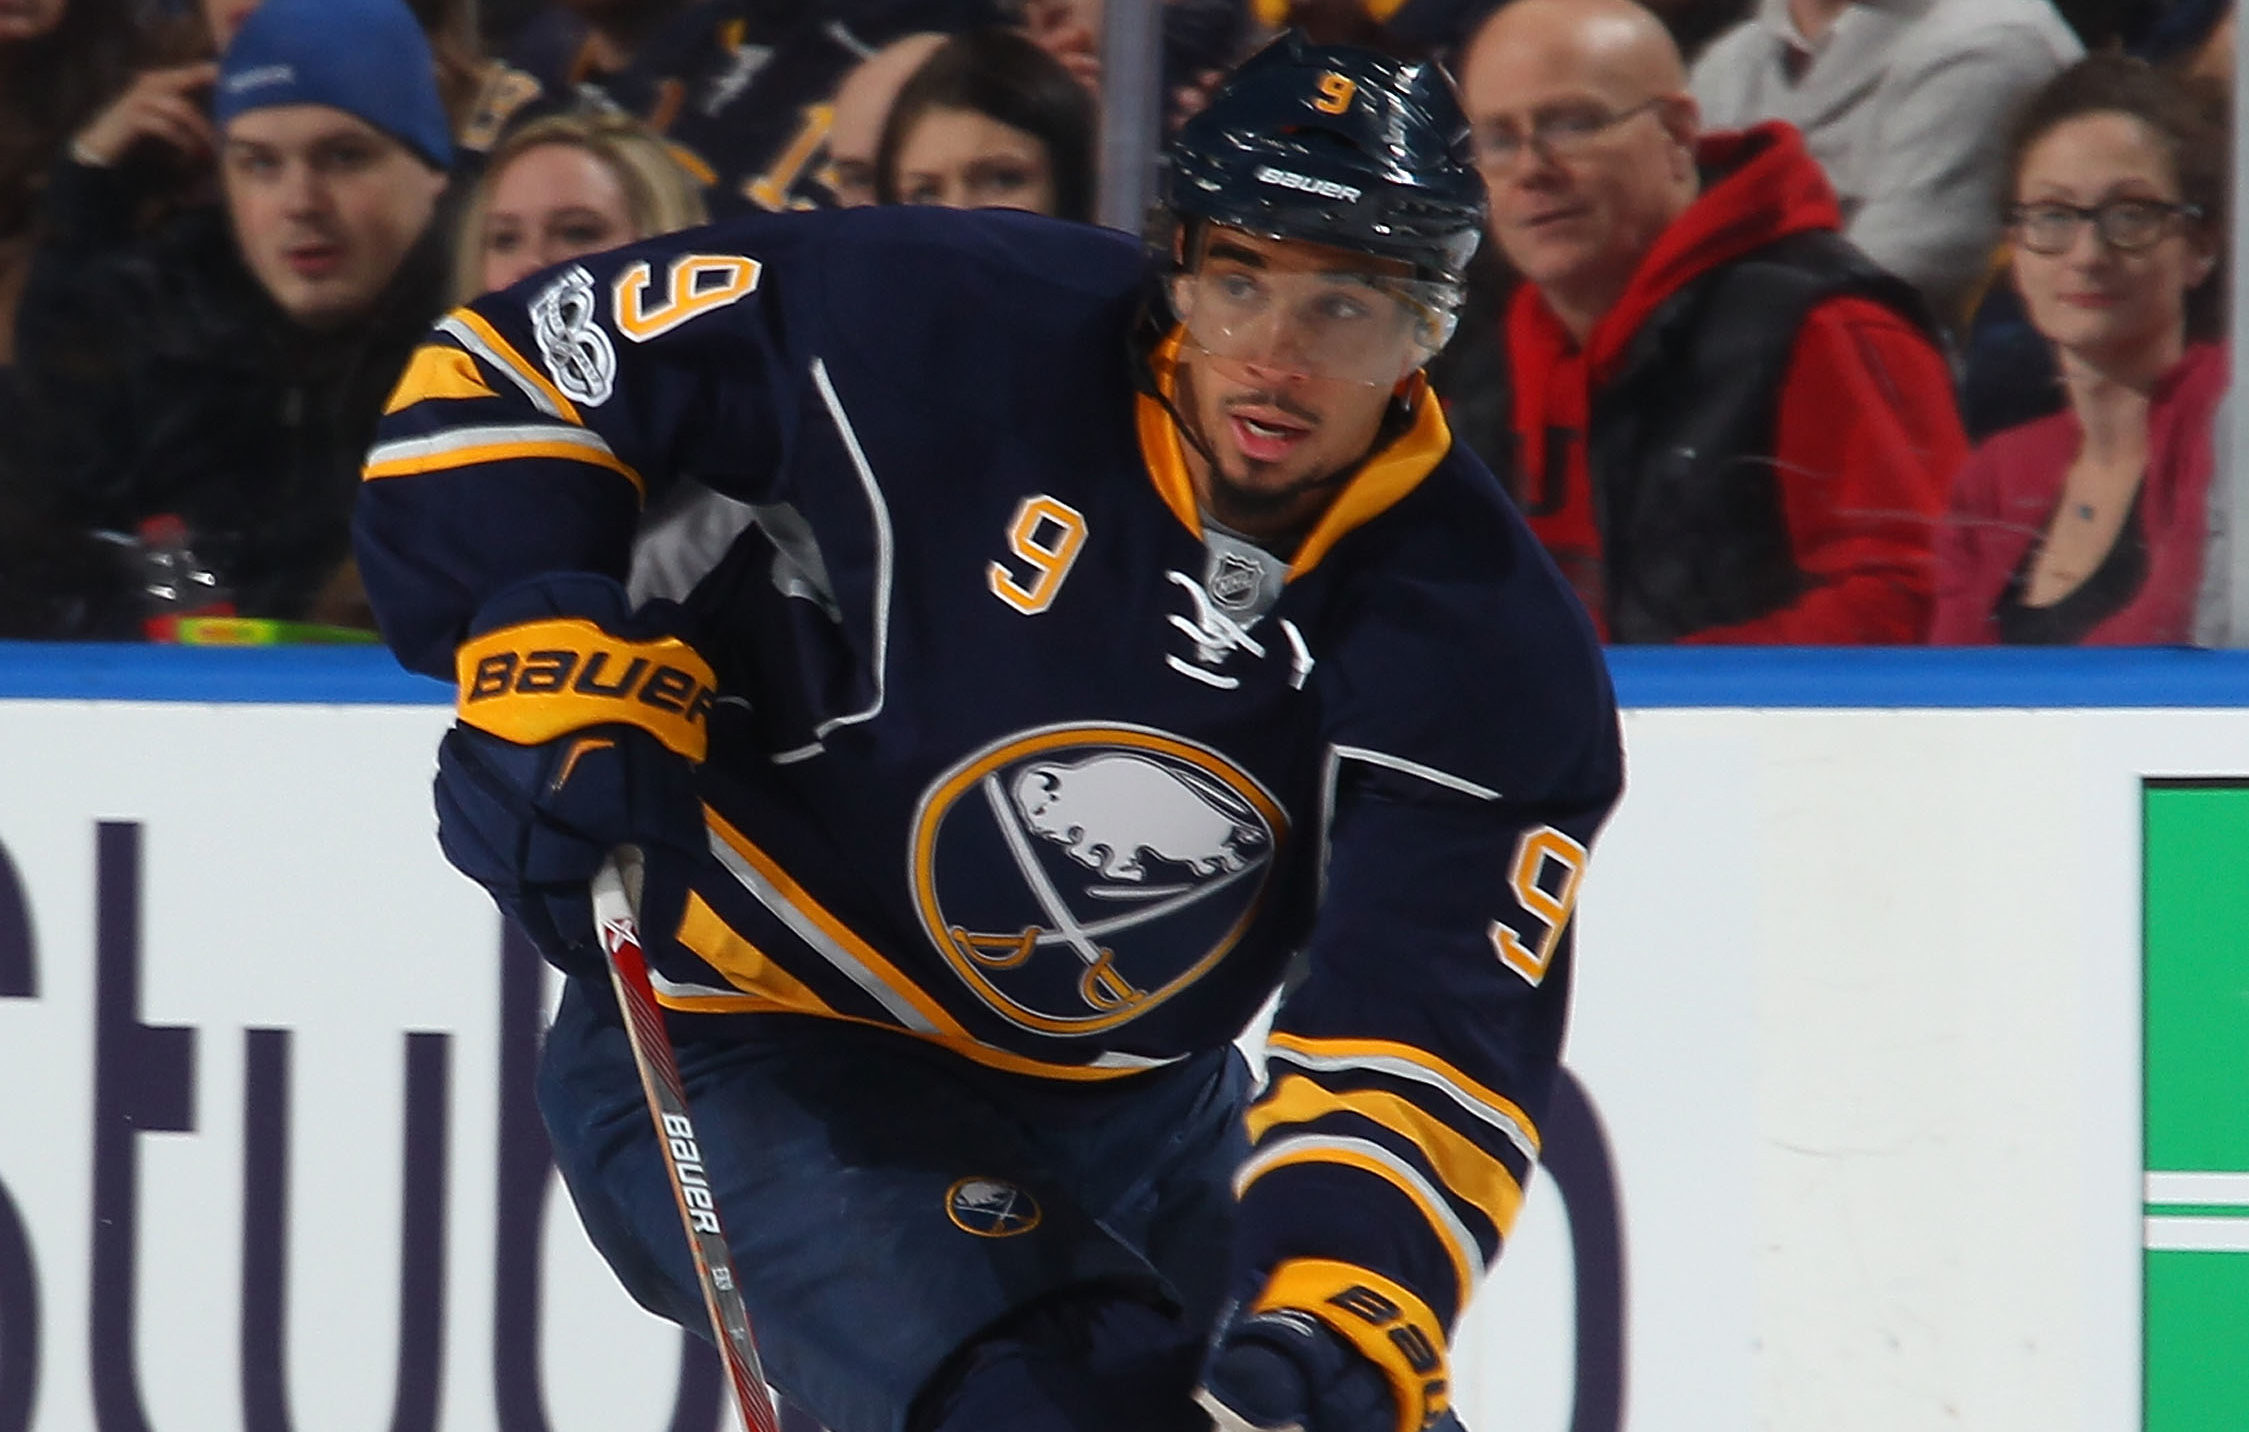 Sabres Kane Avalanche Home 021617 Stock Getty